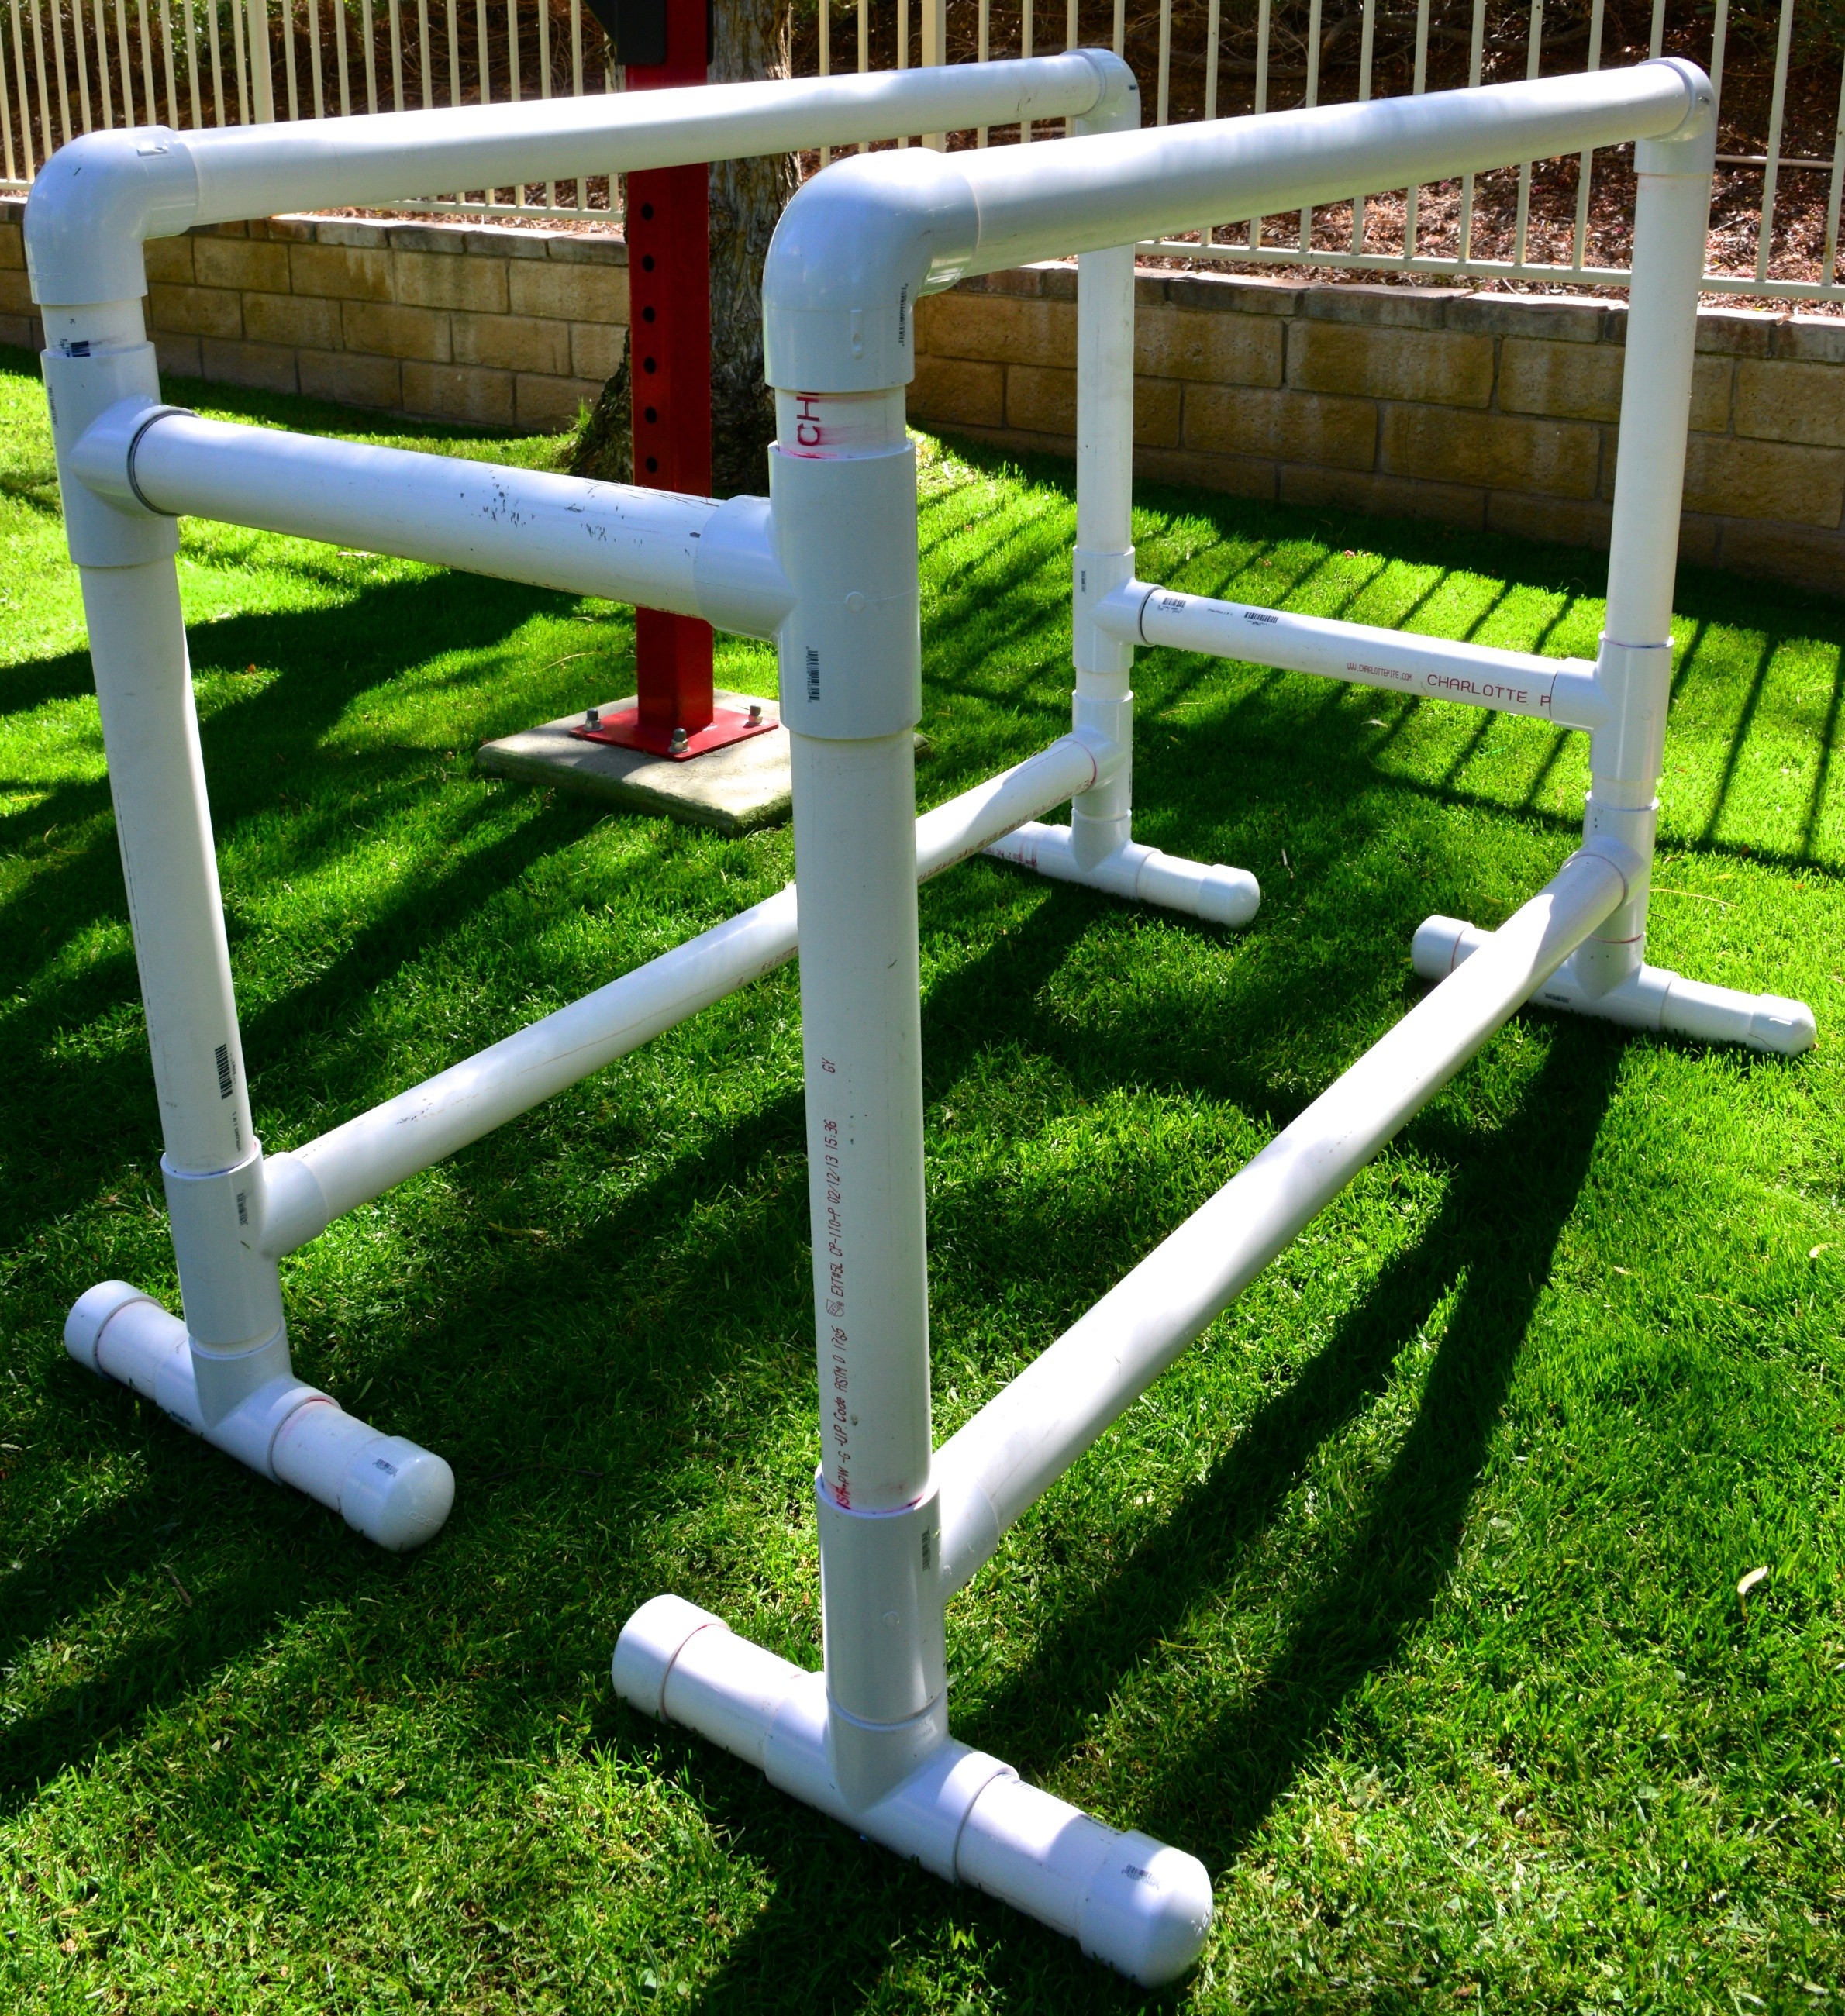 Gymnastics equipment for toddlers